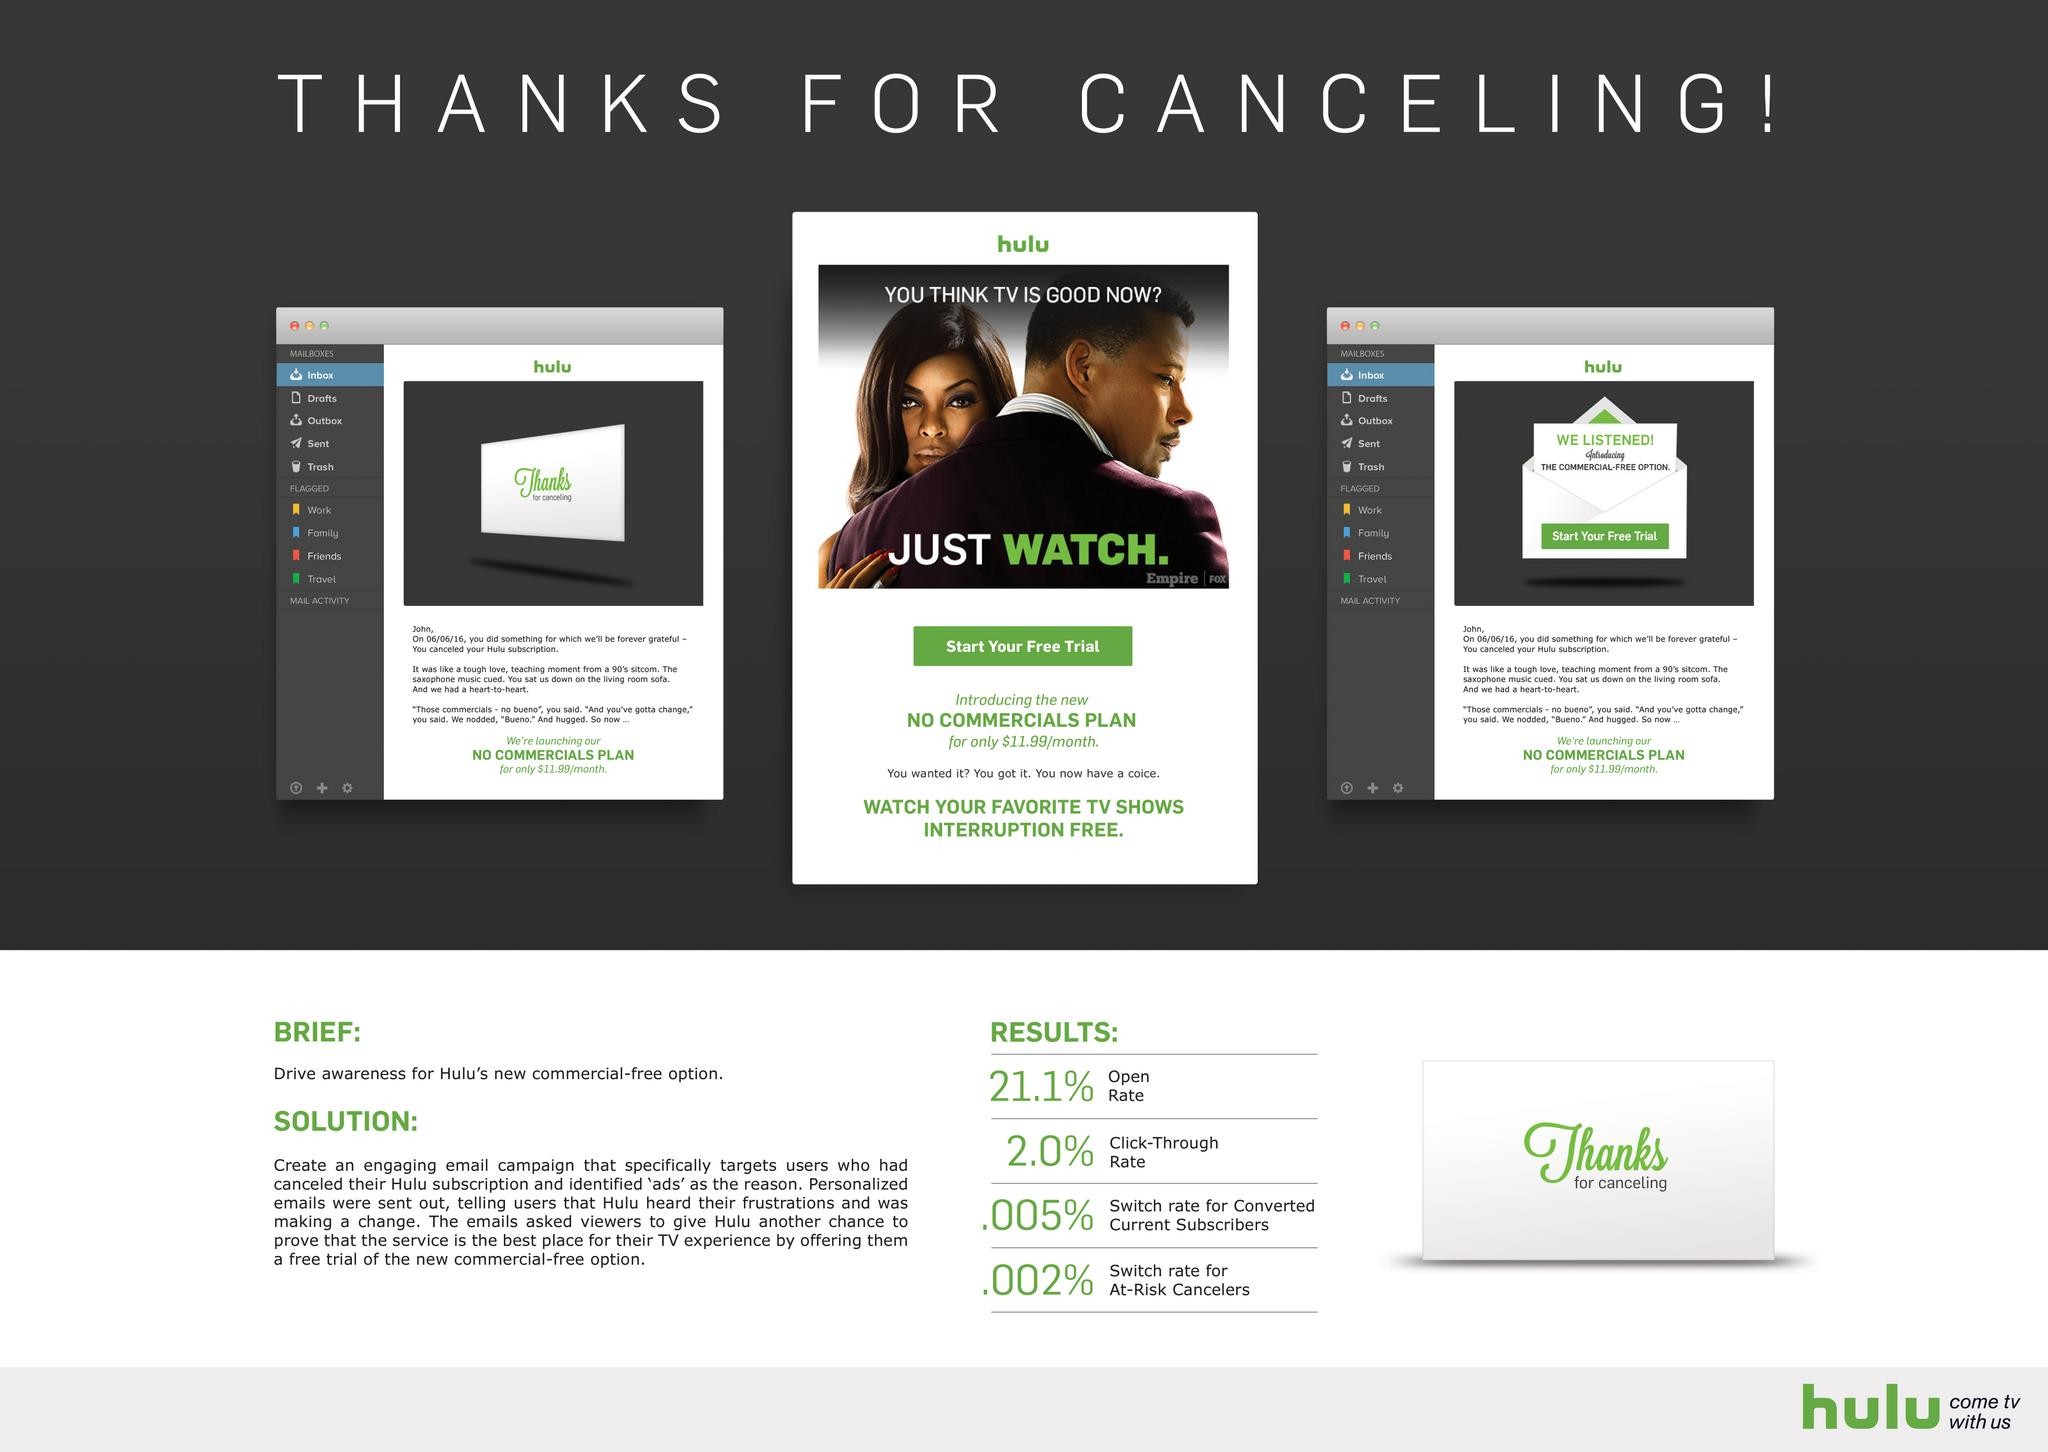 HULU "THANKS FOR CANCELING"